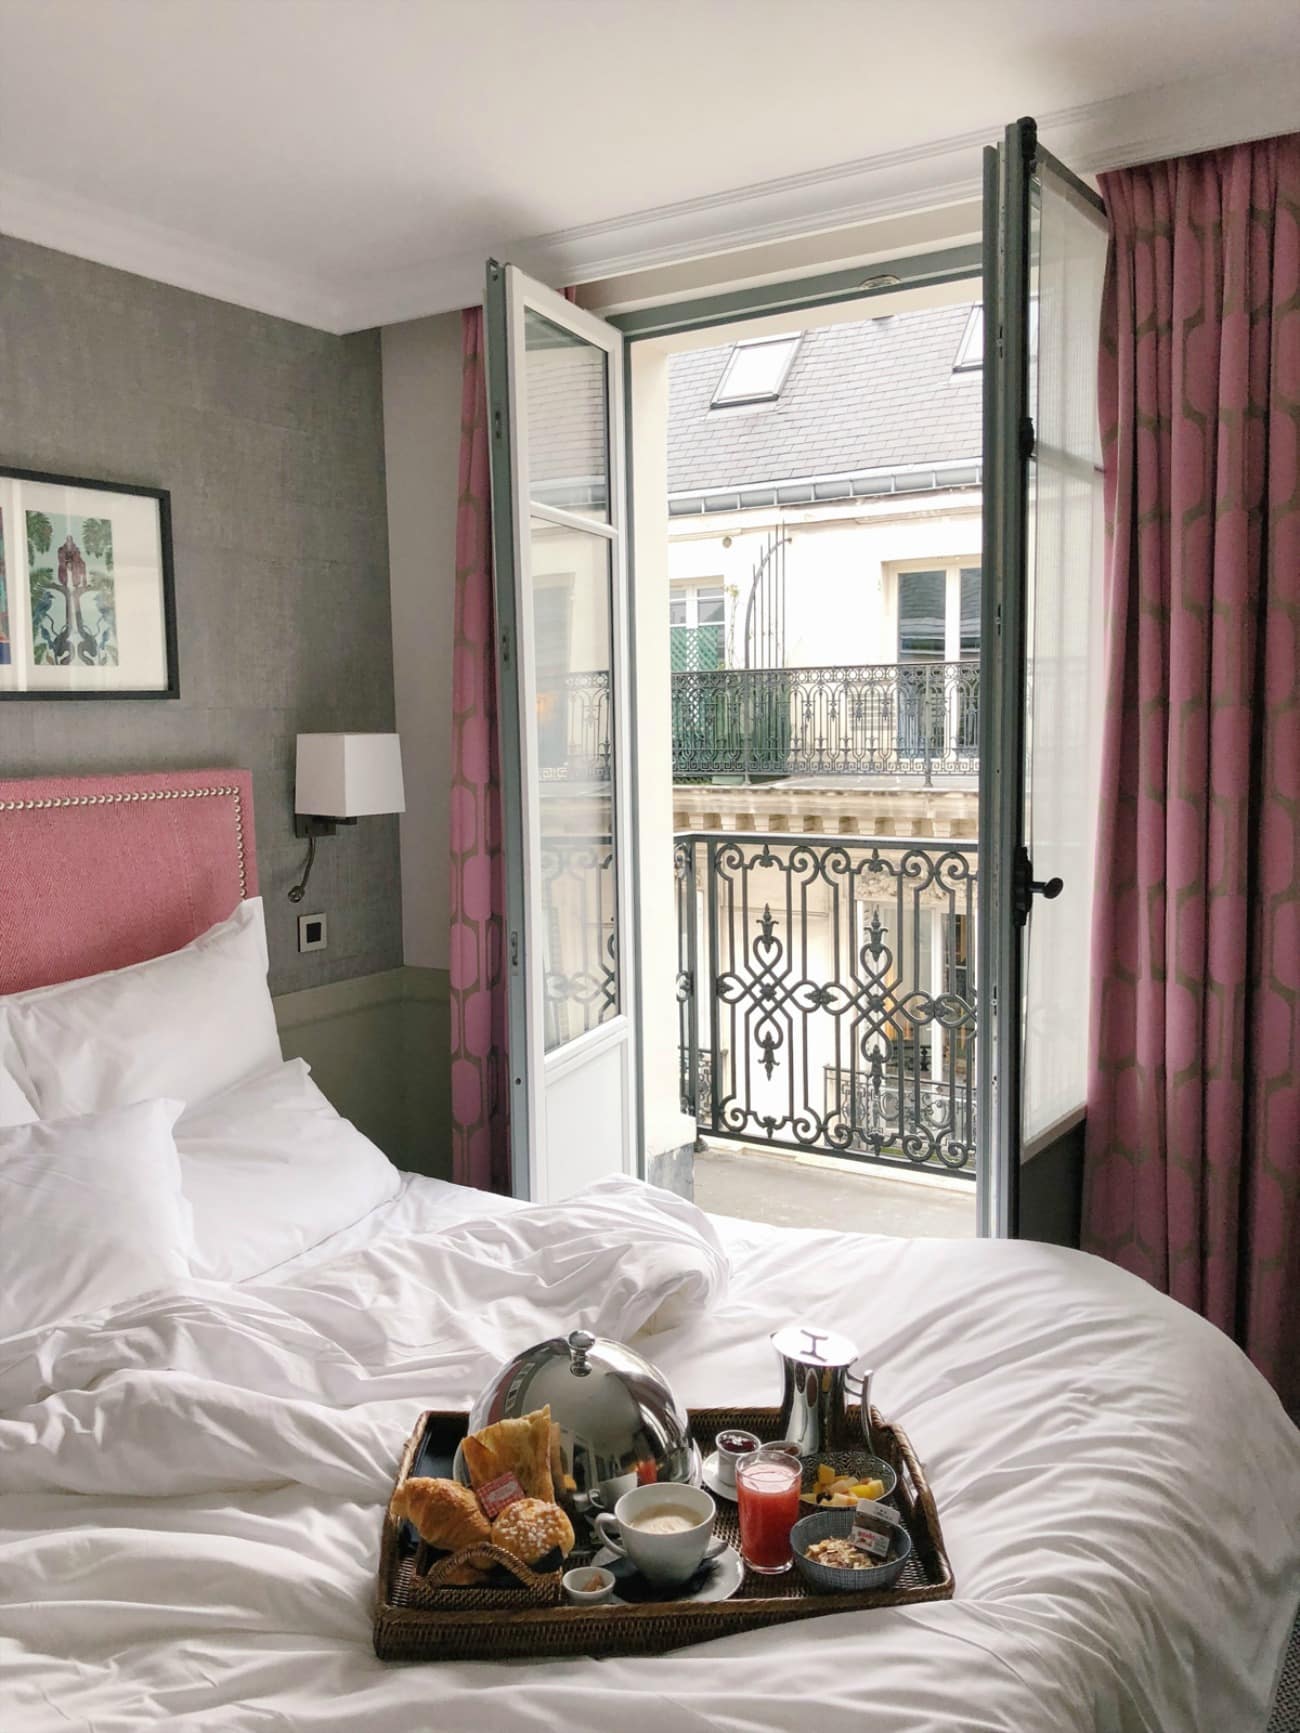 Where to Stay in Paris